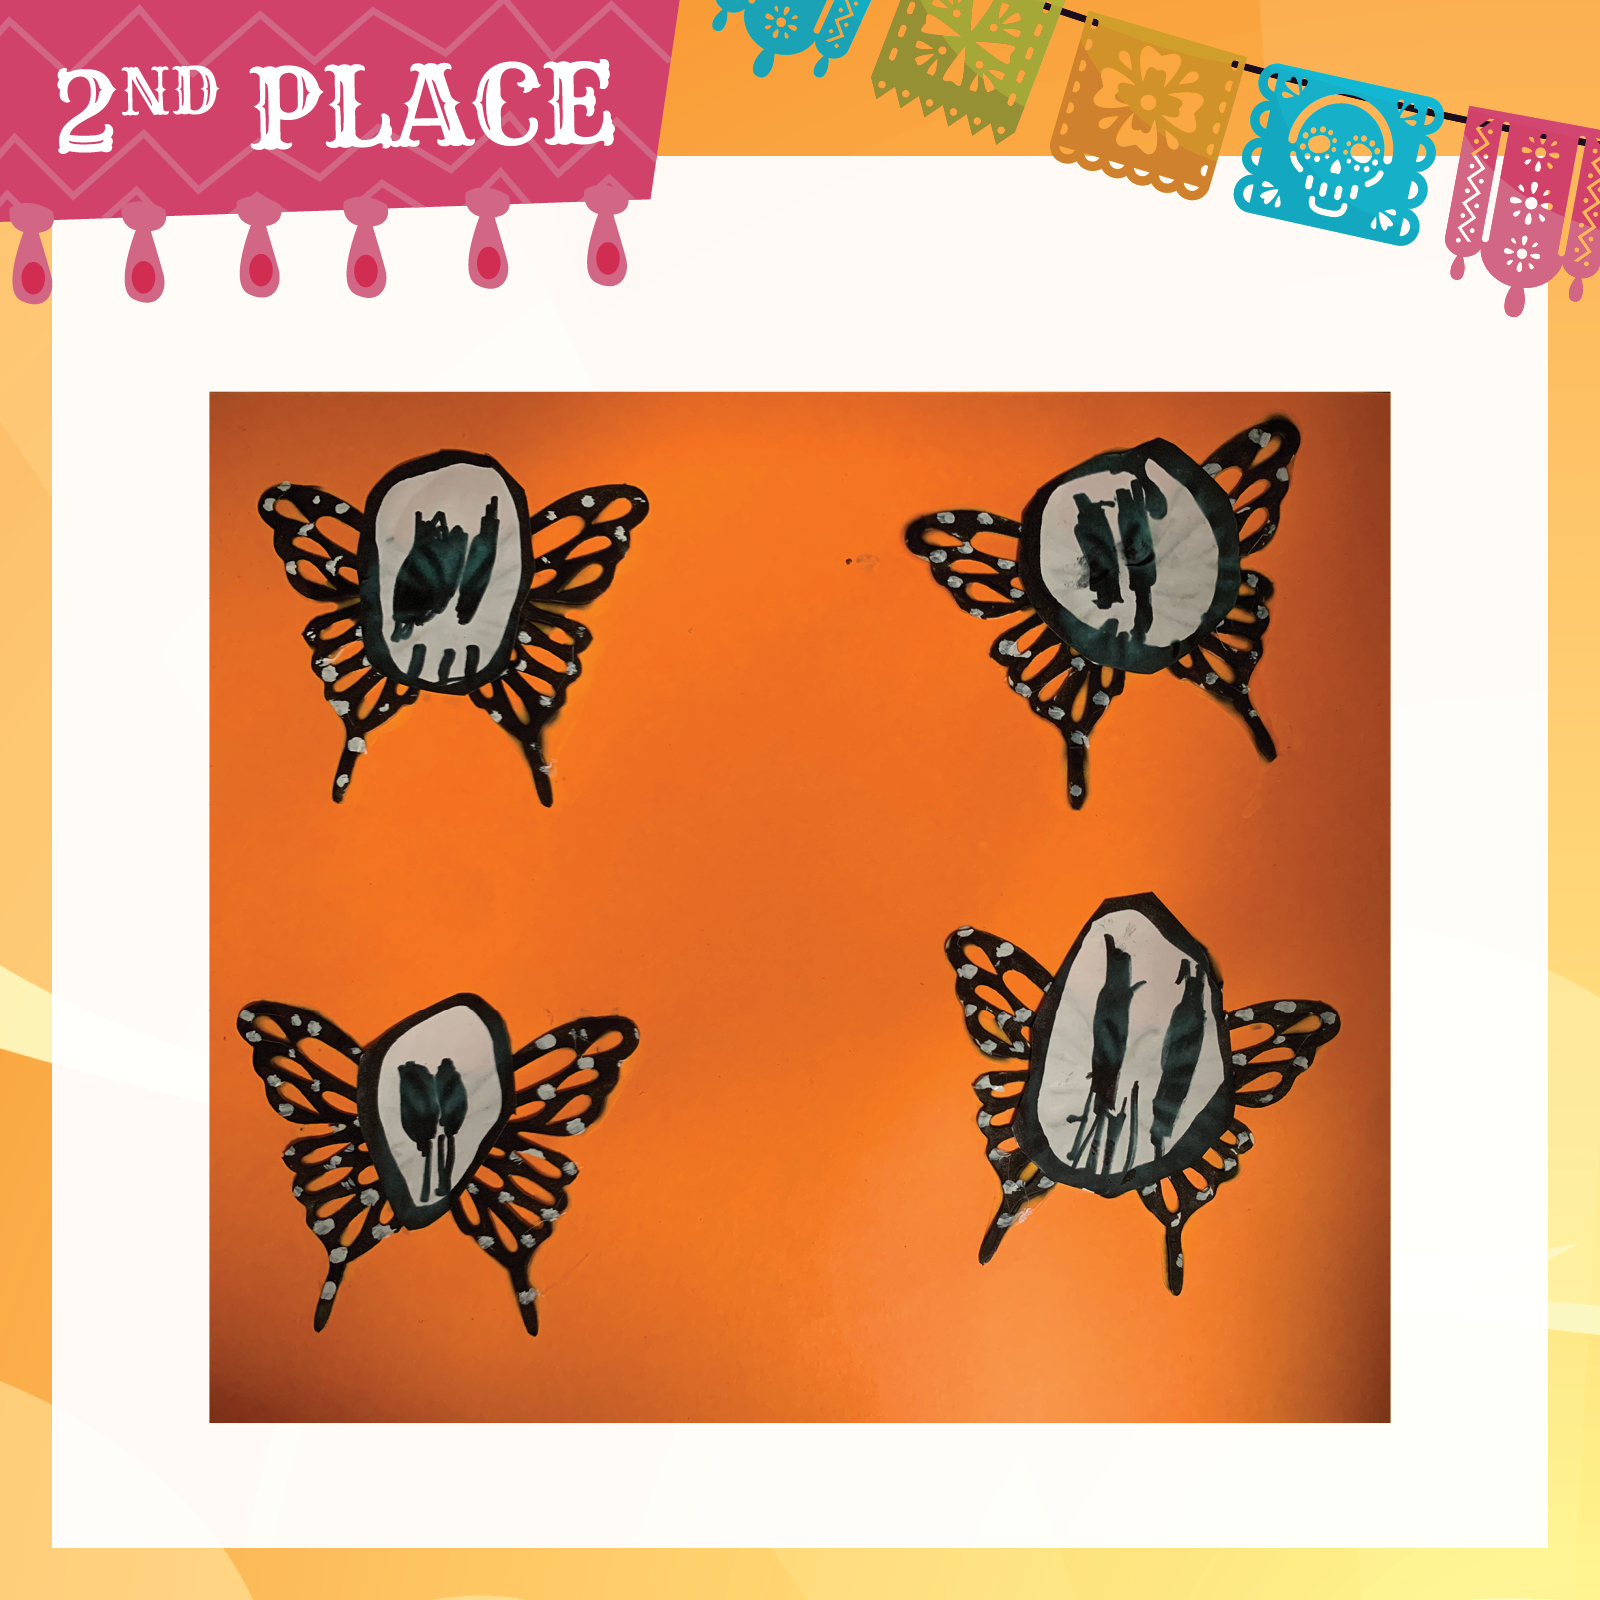 Drawing of 4 black butterflies with skeleton faces on orange paper